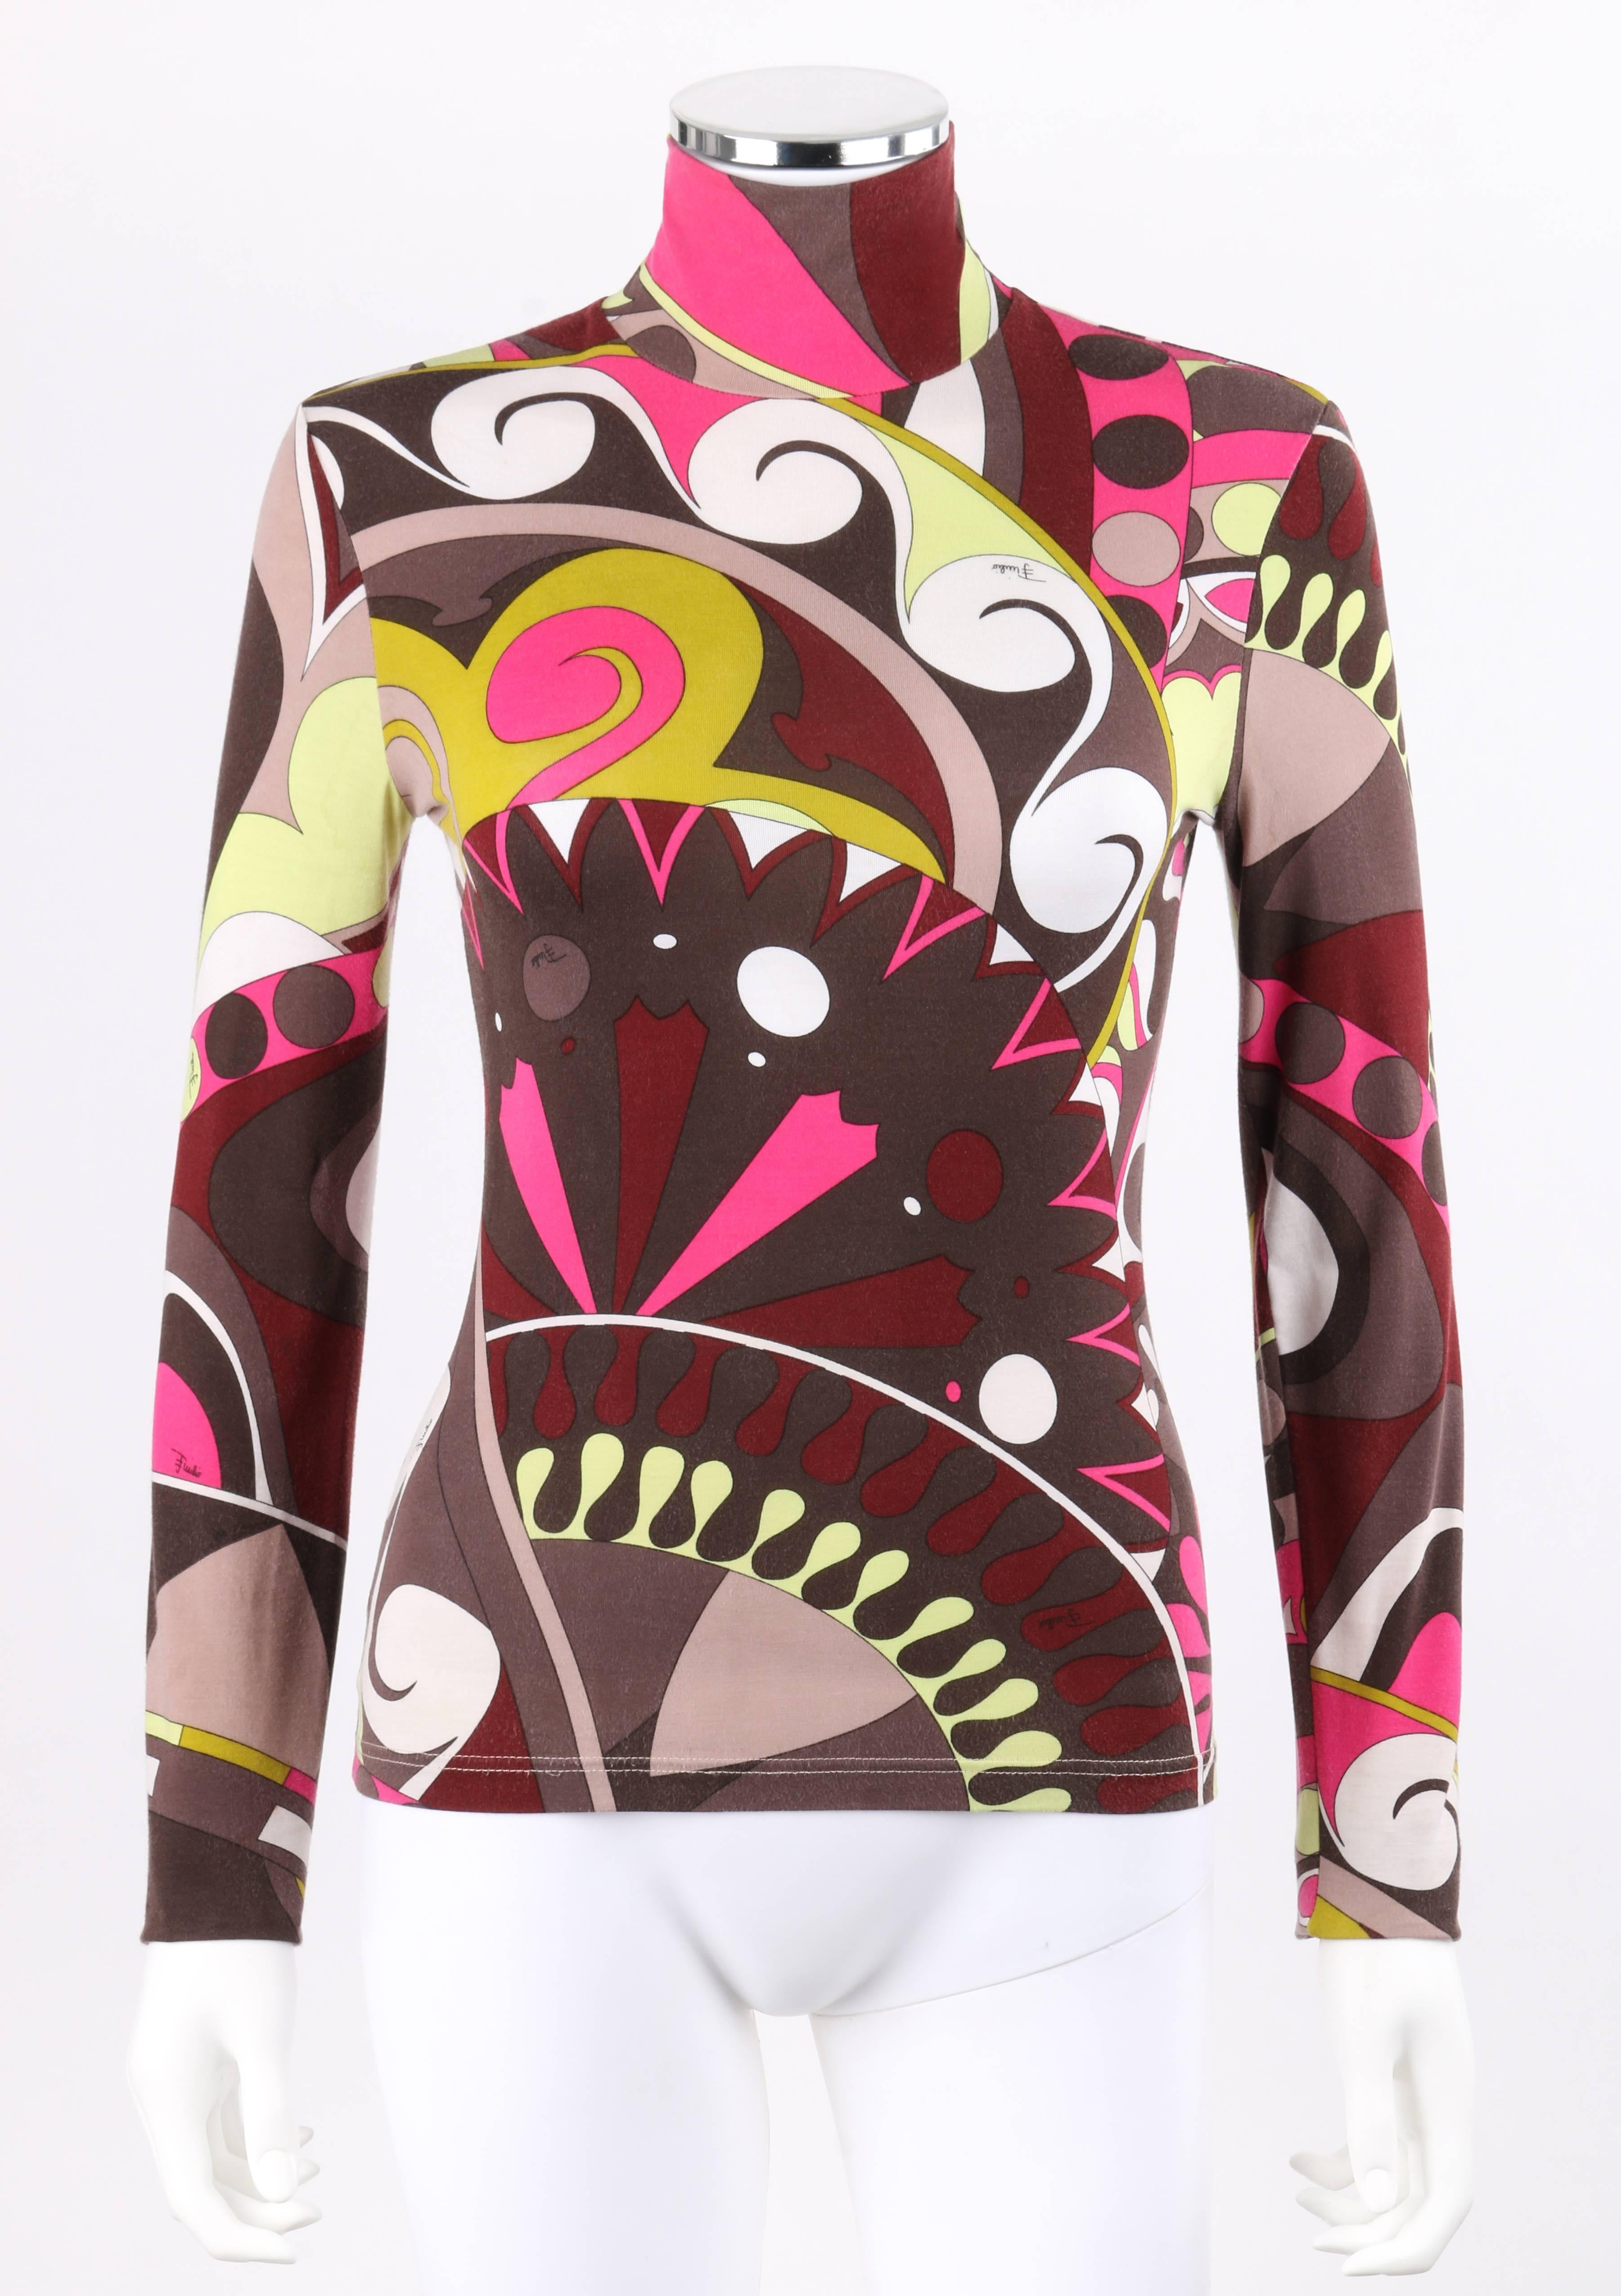 Emilio Pucci brown multi-color op art signature print jersey knit turtleneck top. Large multi-color op art signature print jersey knit in shades of brown, yellow, gray, pink, and white. Turtleneck collar. Long sleeves. Slip-on style. Unlined. Marked